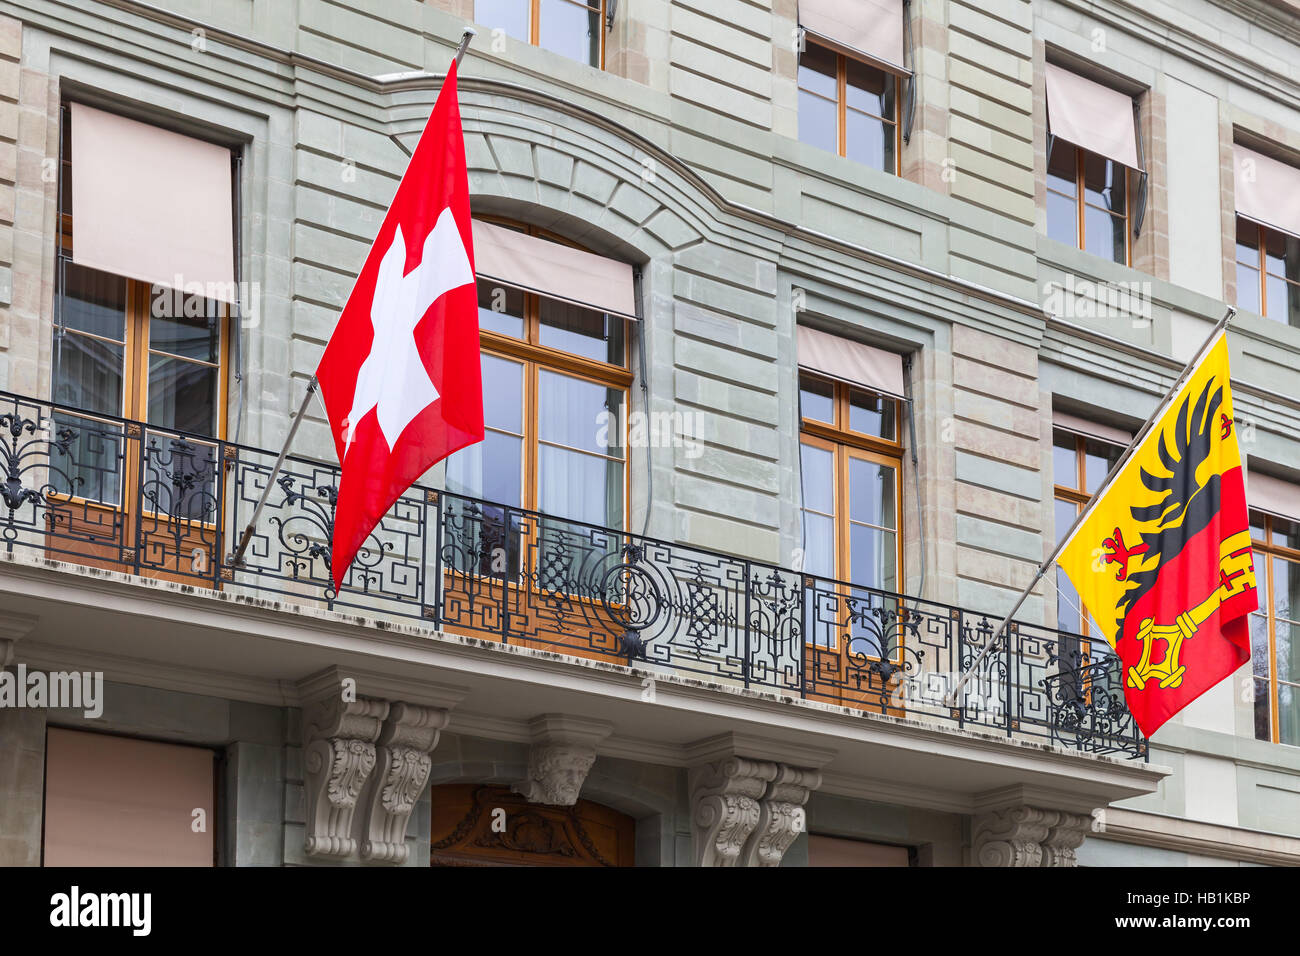 Geneva city, Switzerland. National Swiss and city flags mounted on old house wall Stock Photo